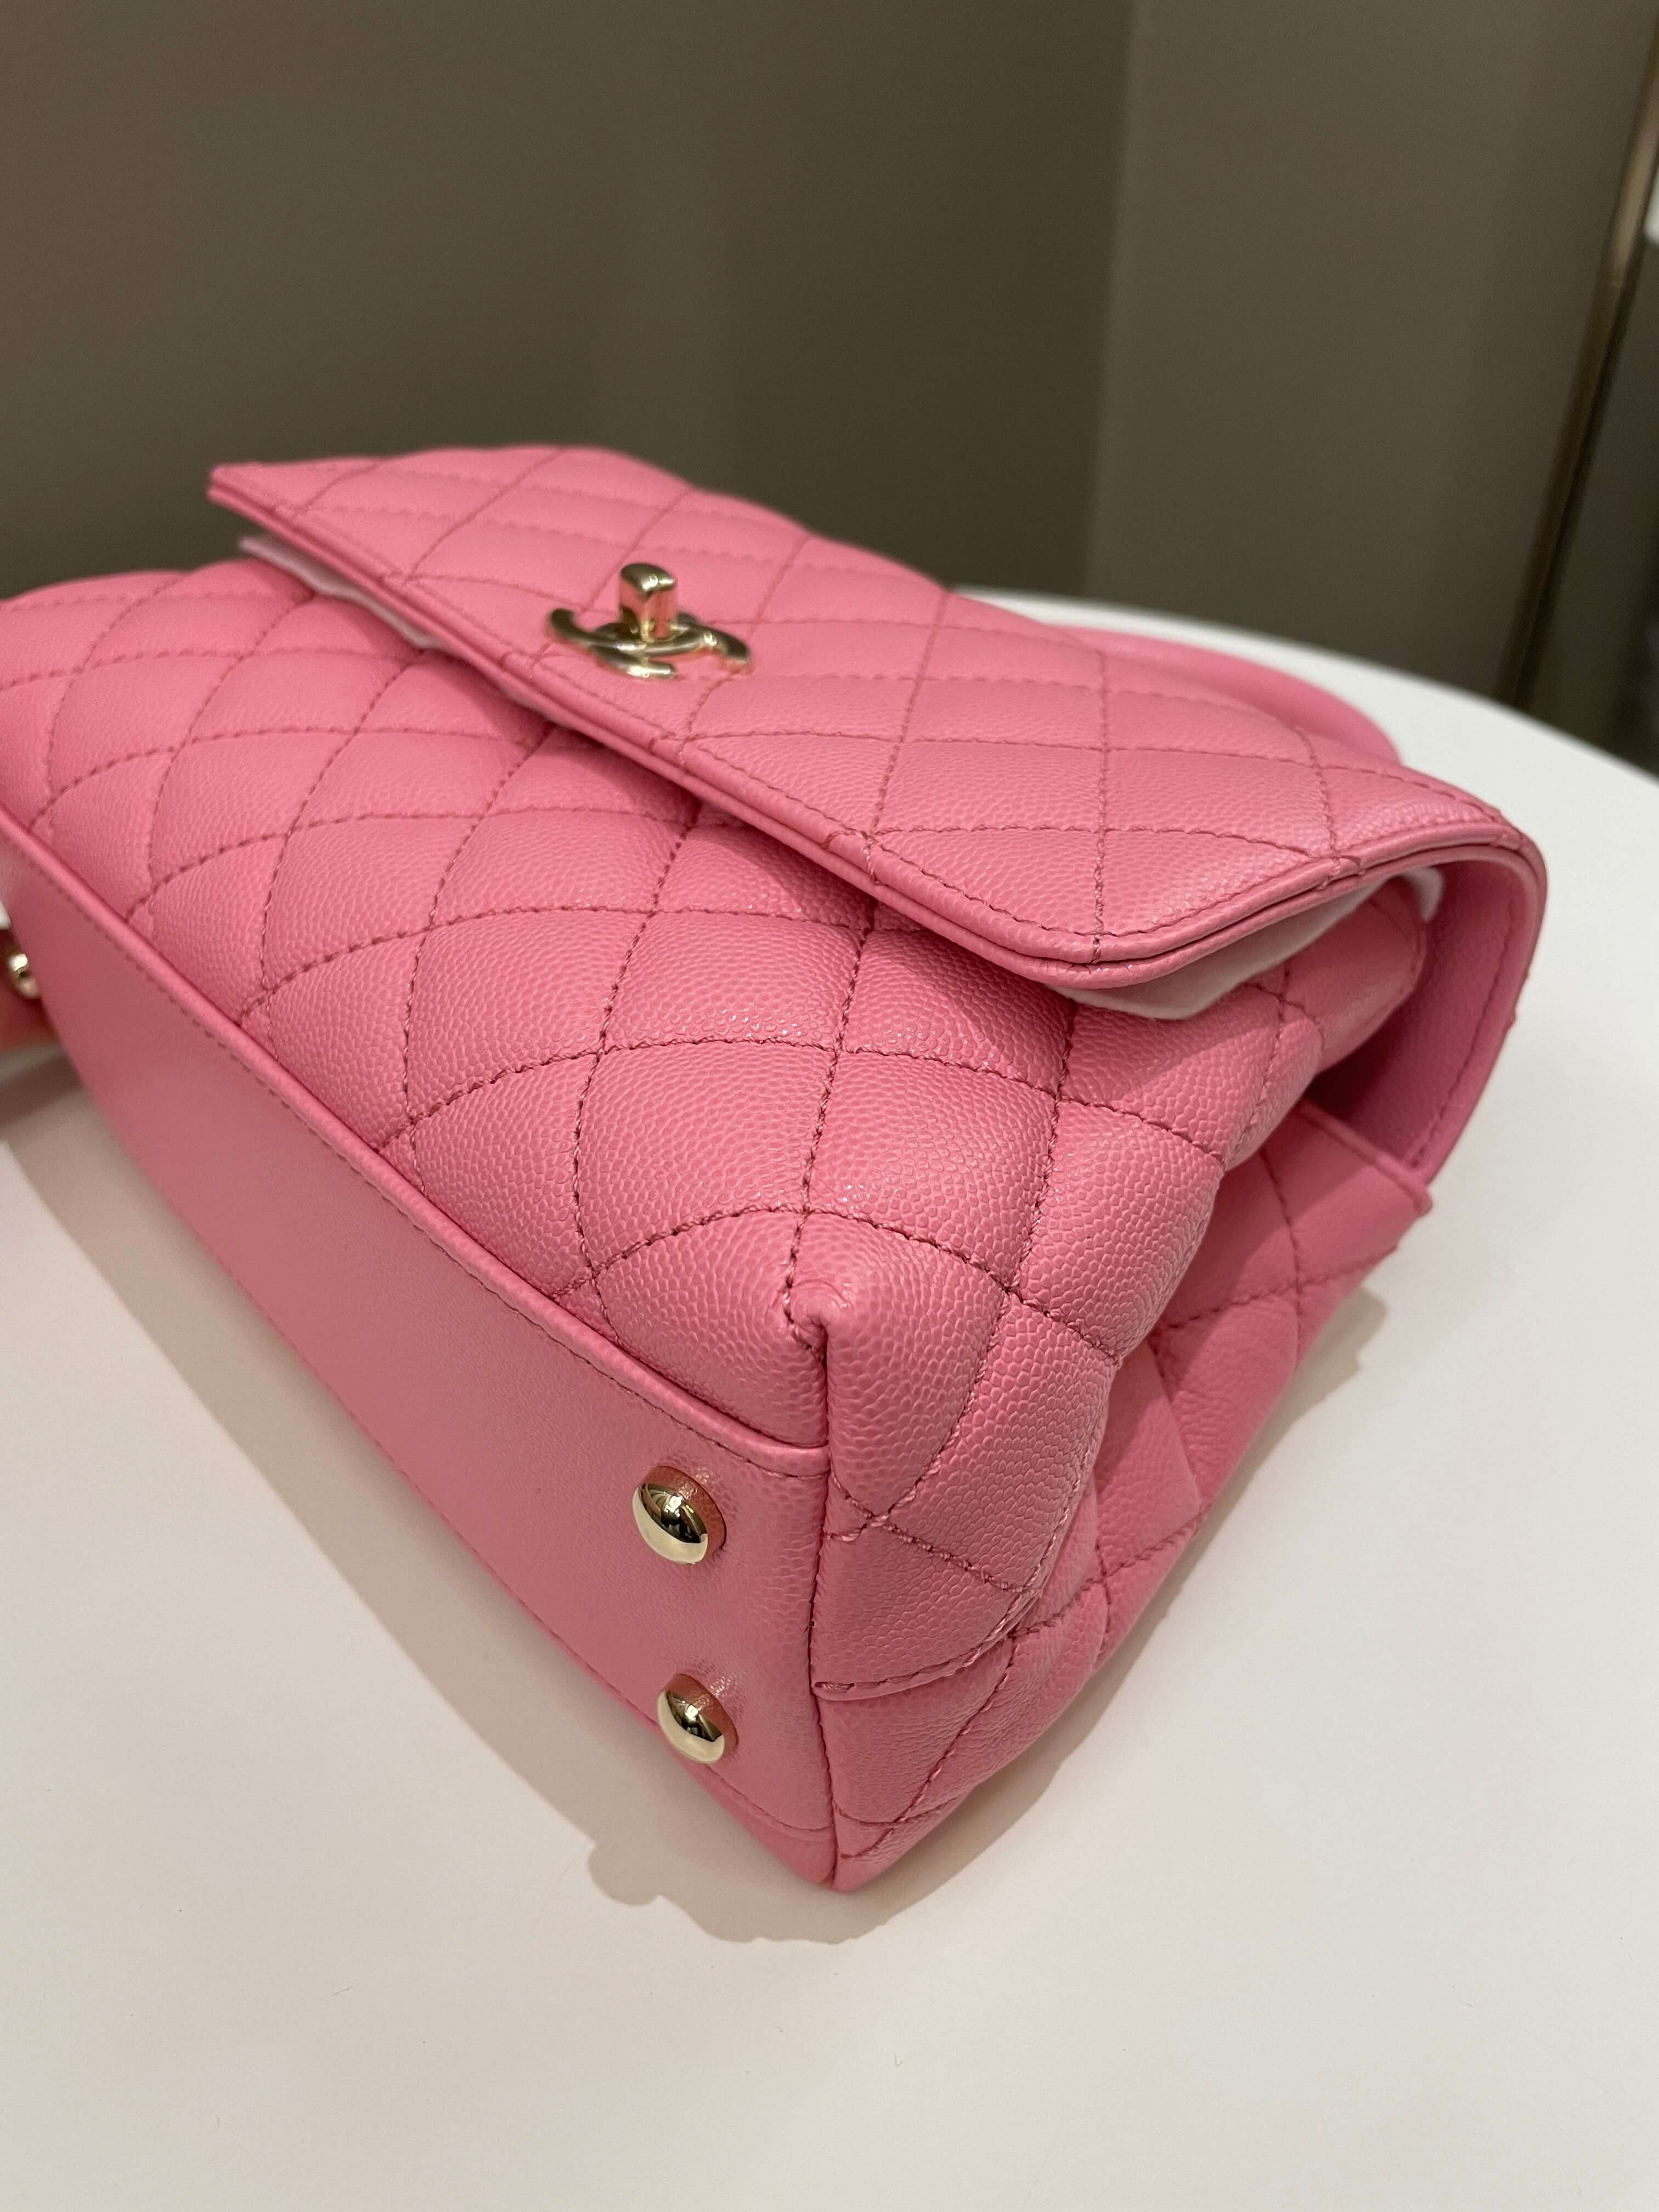 Chanel Quilted Coco Chain Handle Pink Caviar